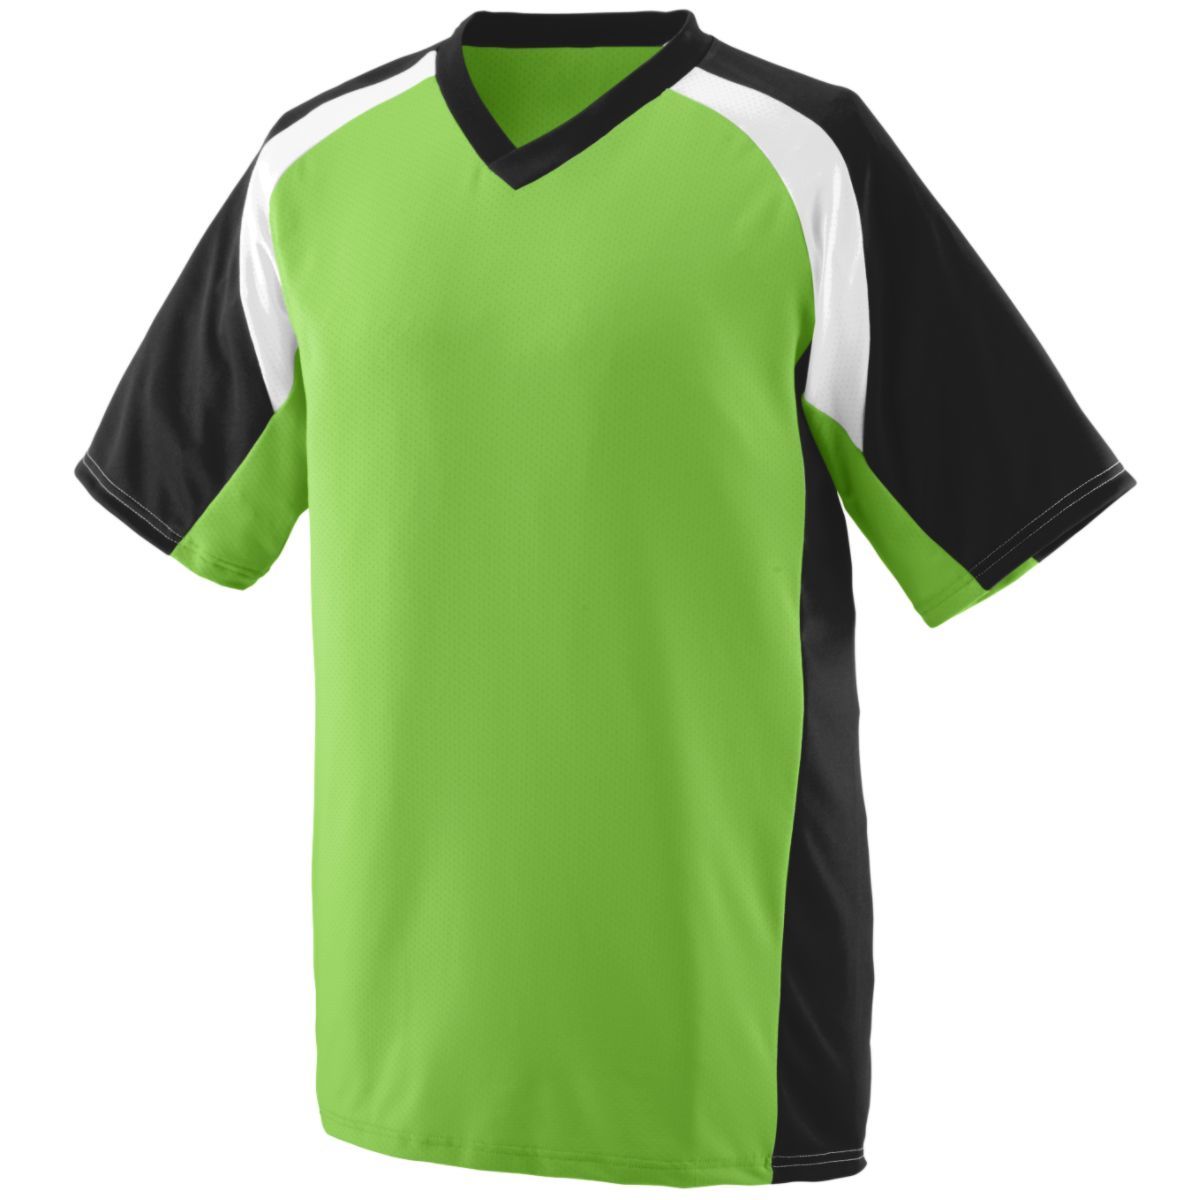 Augusta Sportswear Youth Nitro Jersey in Lime/Black/White  -Part of the Youth, Youth-Jersey, Augusta-Products, Football, Shirts, All-Sports, All-Sports-1 product lines at KanaleyCreations.com